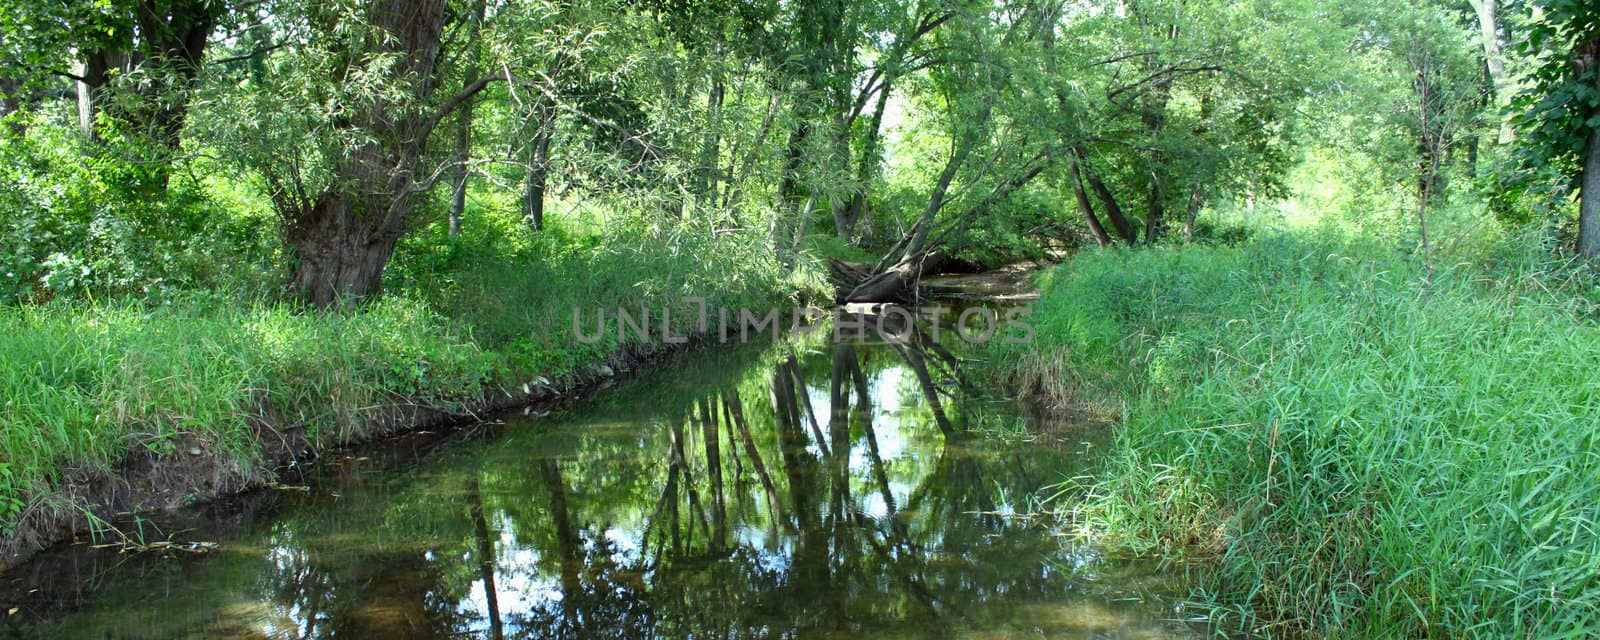 A creek runs through the woodlands of northern Illinois.